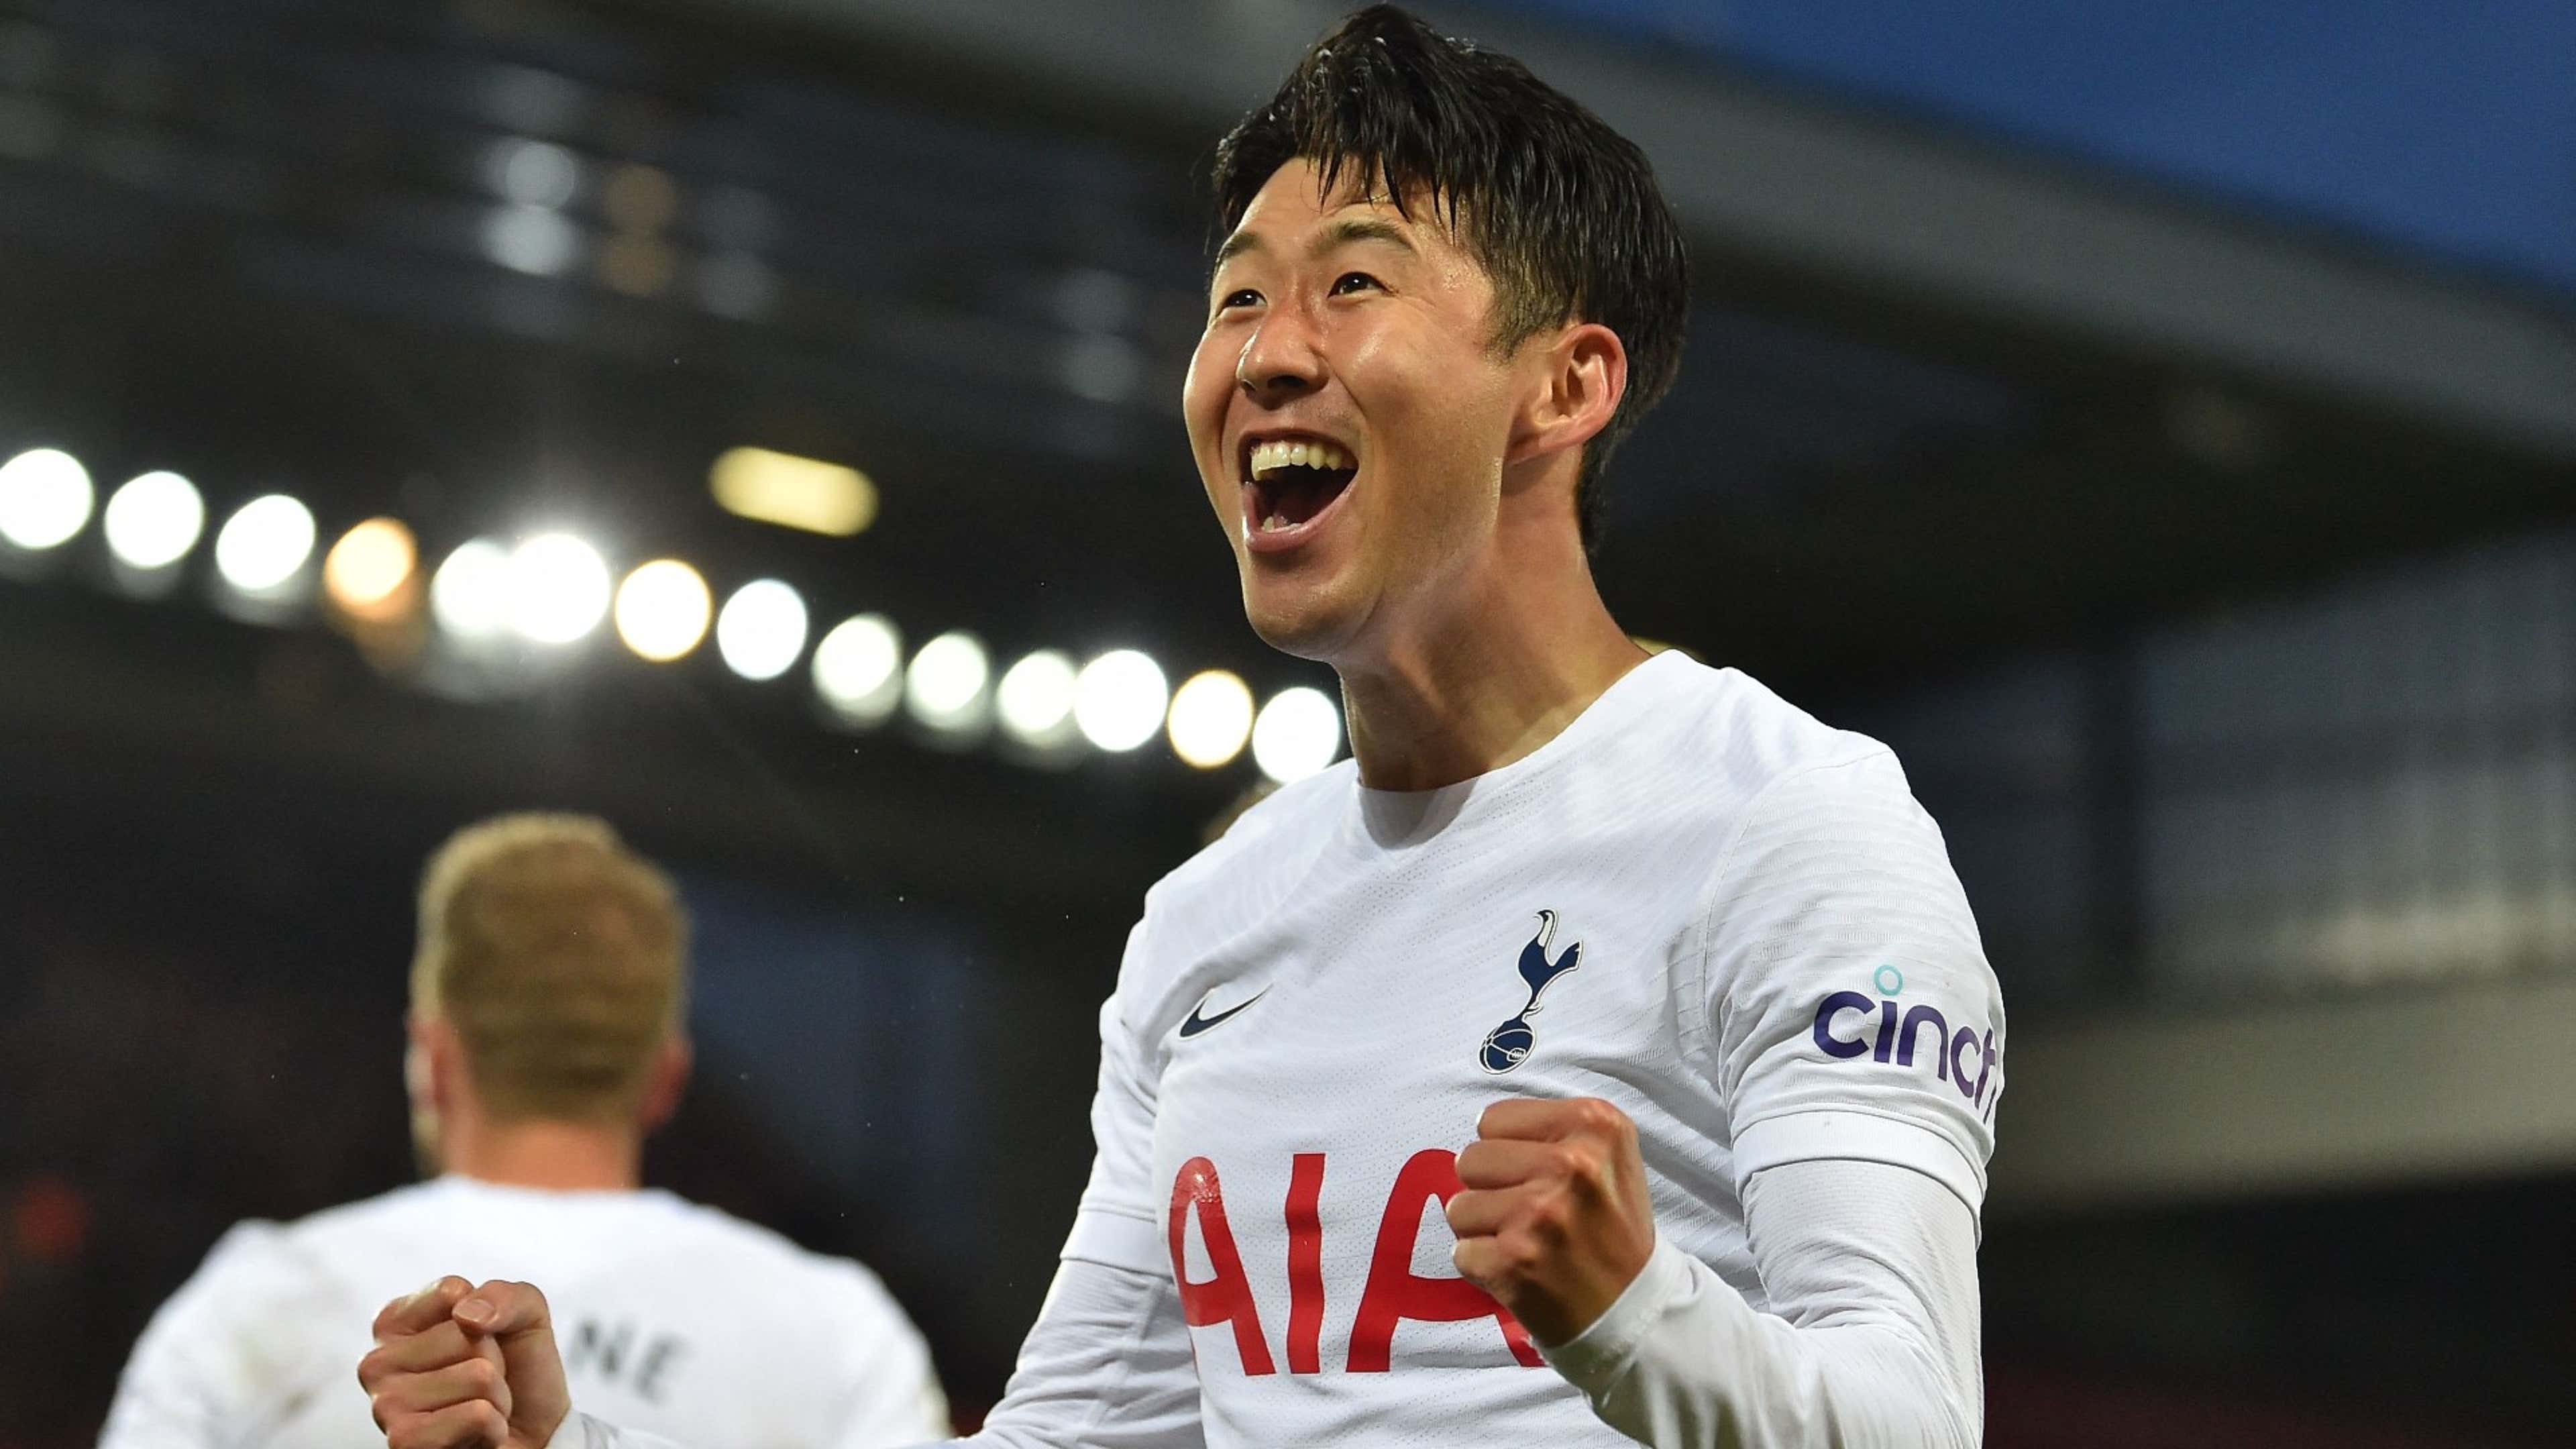 How Does Footballer Son Heung-min Pack for a Trip?